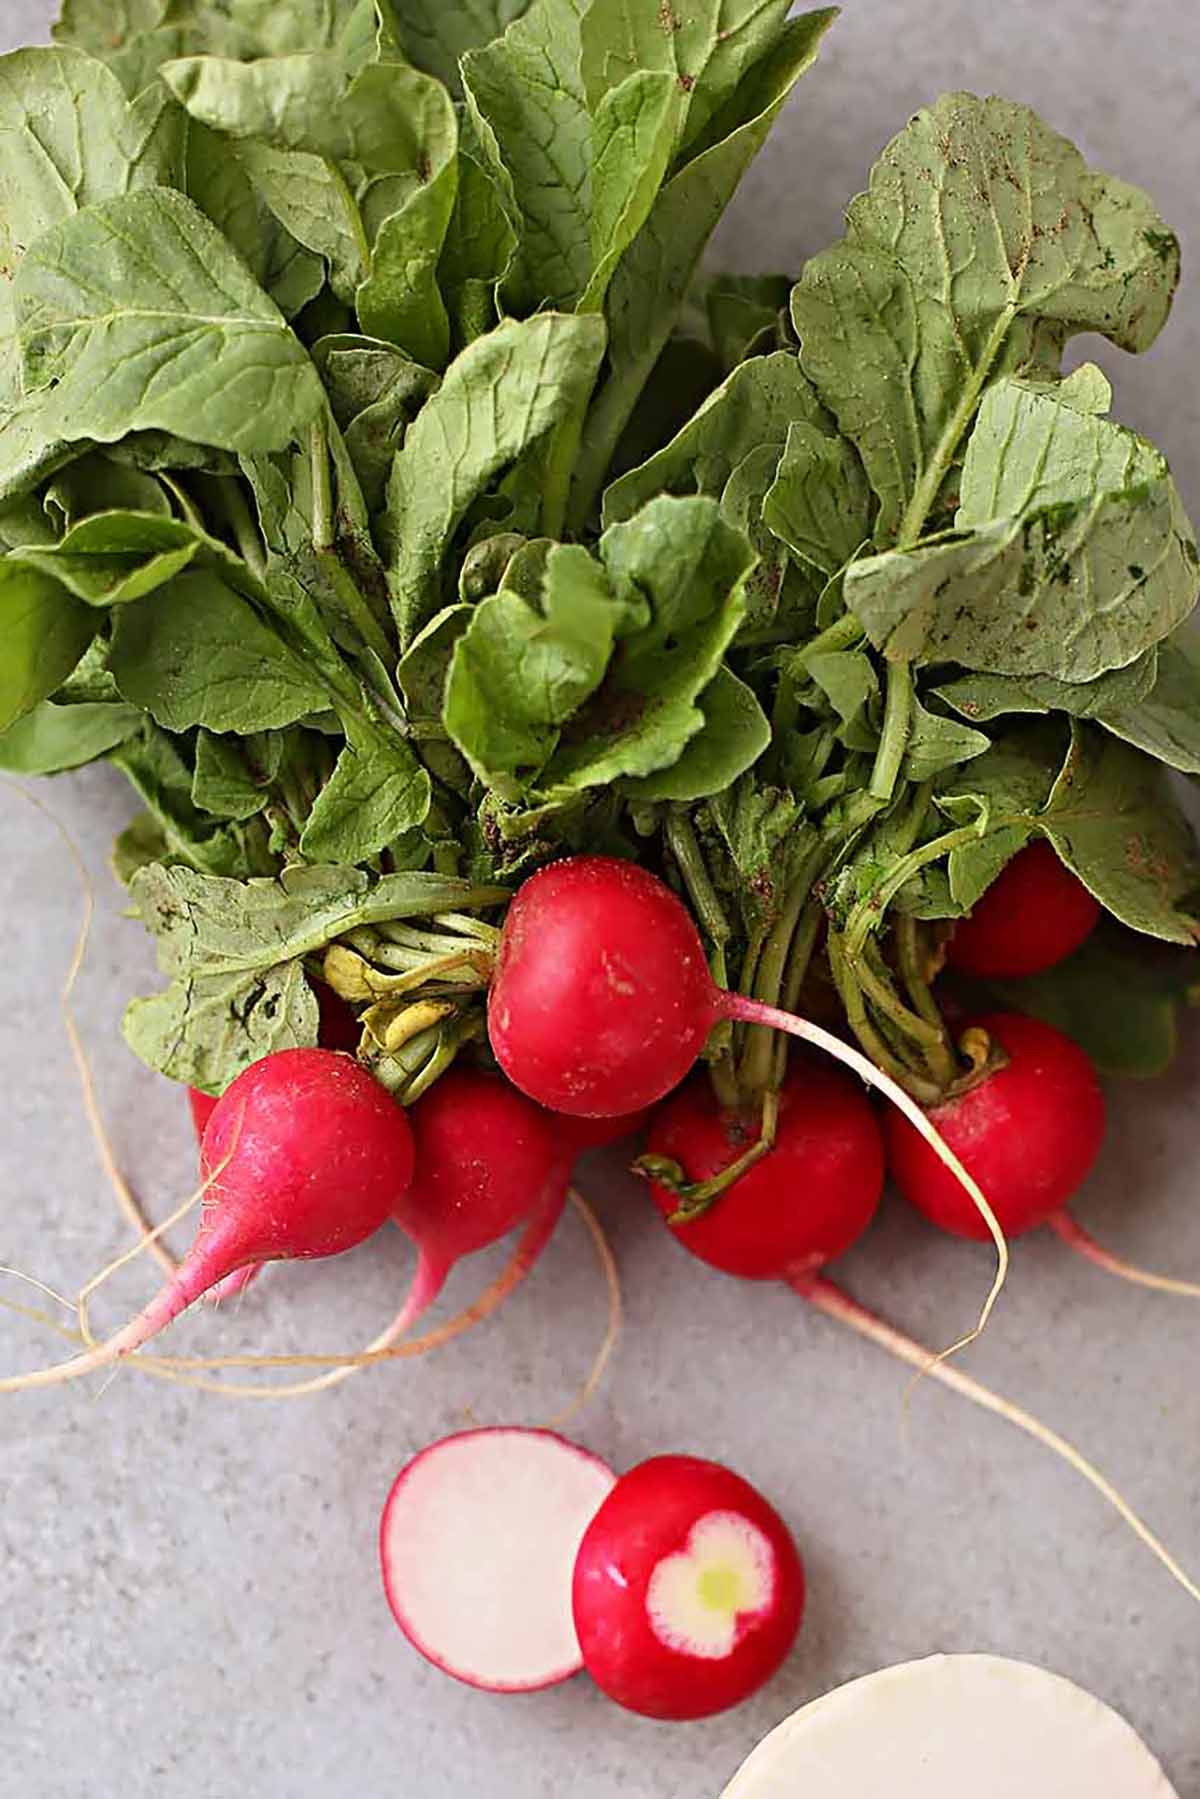 Bunch of radishes on the gray background. 